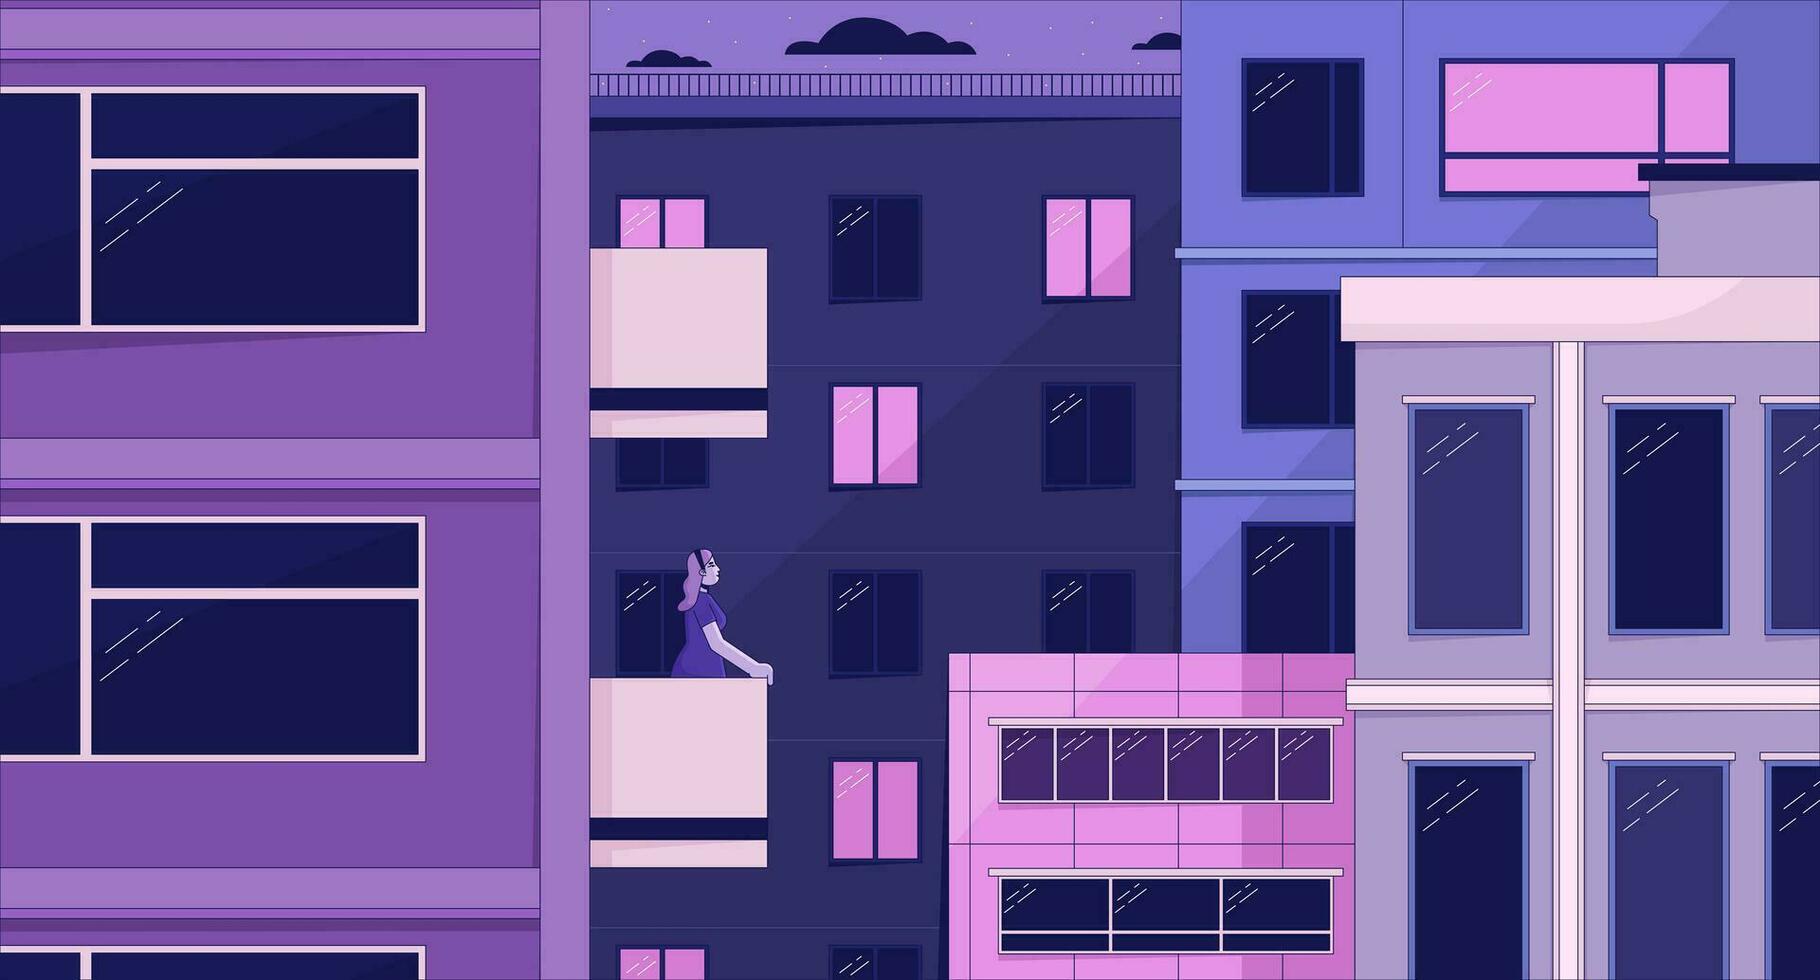 Old town lo fi aesthetic wallpaper. Night in the city. Skyscrapers. City buildings. Woman on balcony 2D vector cartoon exterior illustration, purple lofi background. 90s retro album art, chill vibes Vector